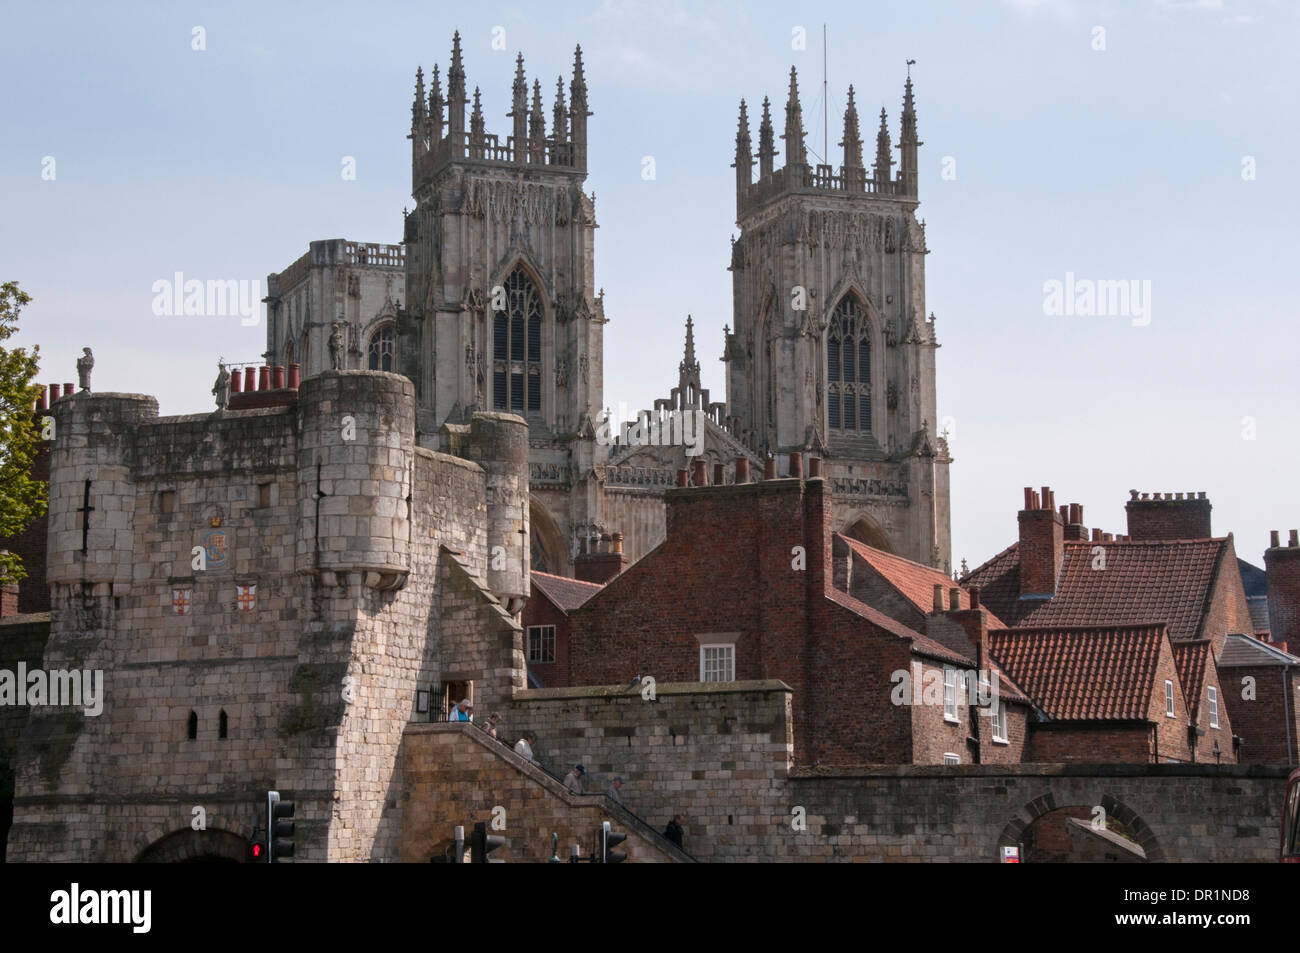 Scenic York - high Minster towers, red pantile roofs, historic defensive gateway (Bootham Bar) & visitors to city walls - North Yorkshire, England, UK Stock Photo